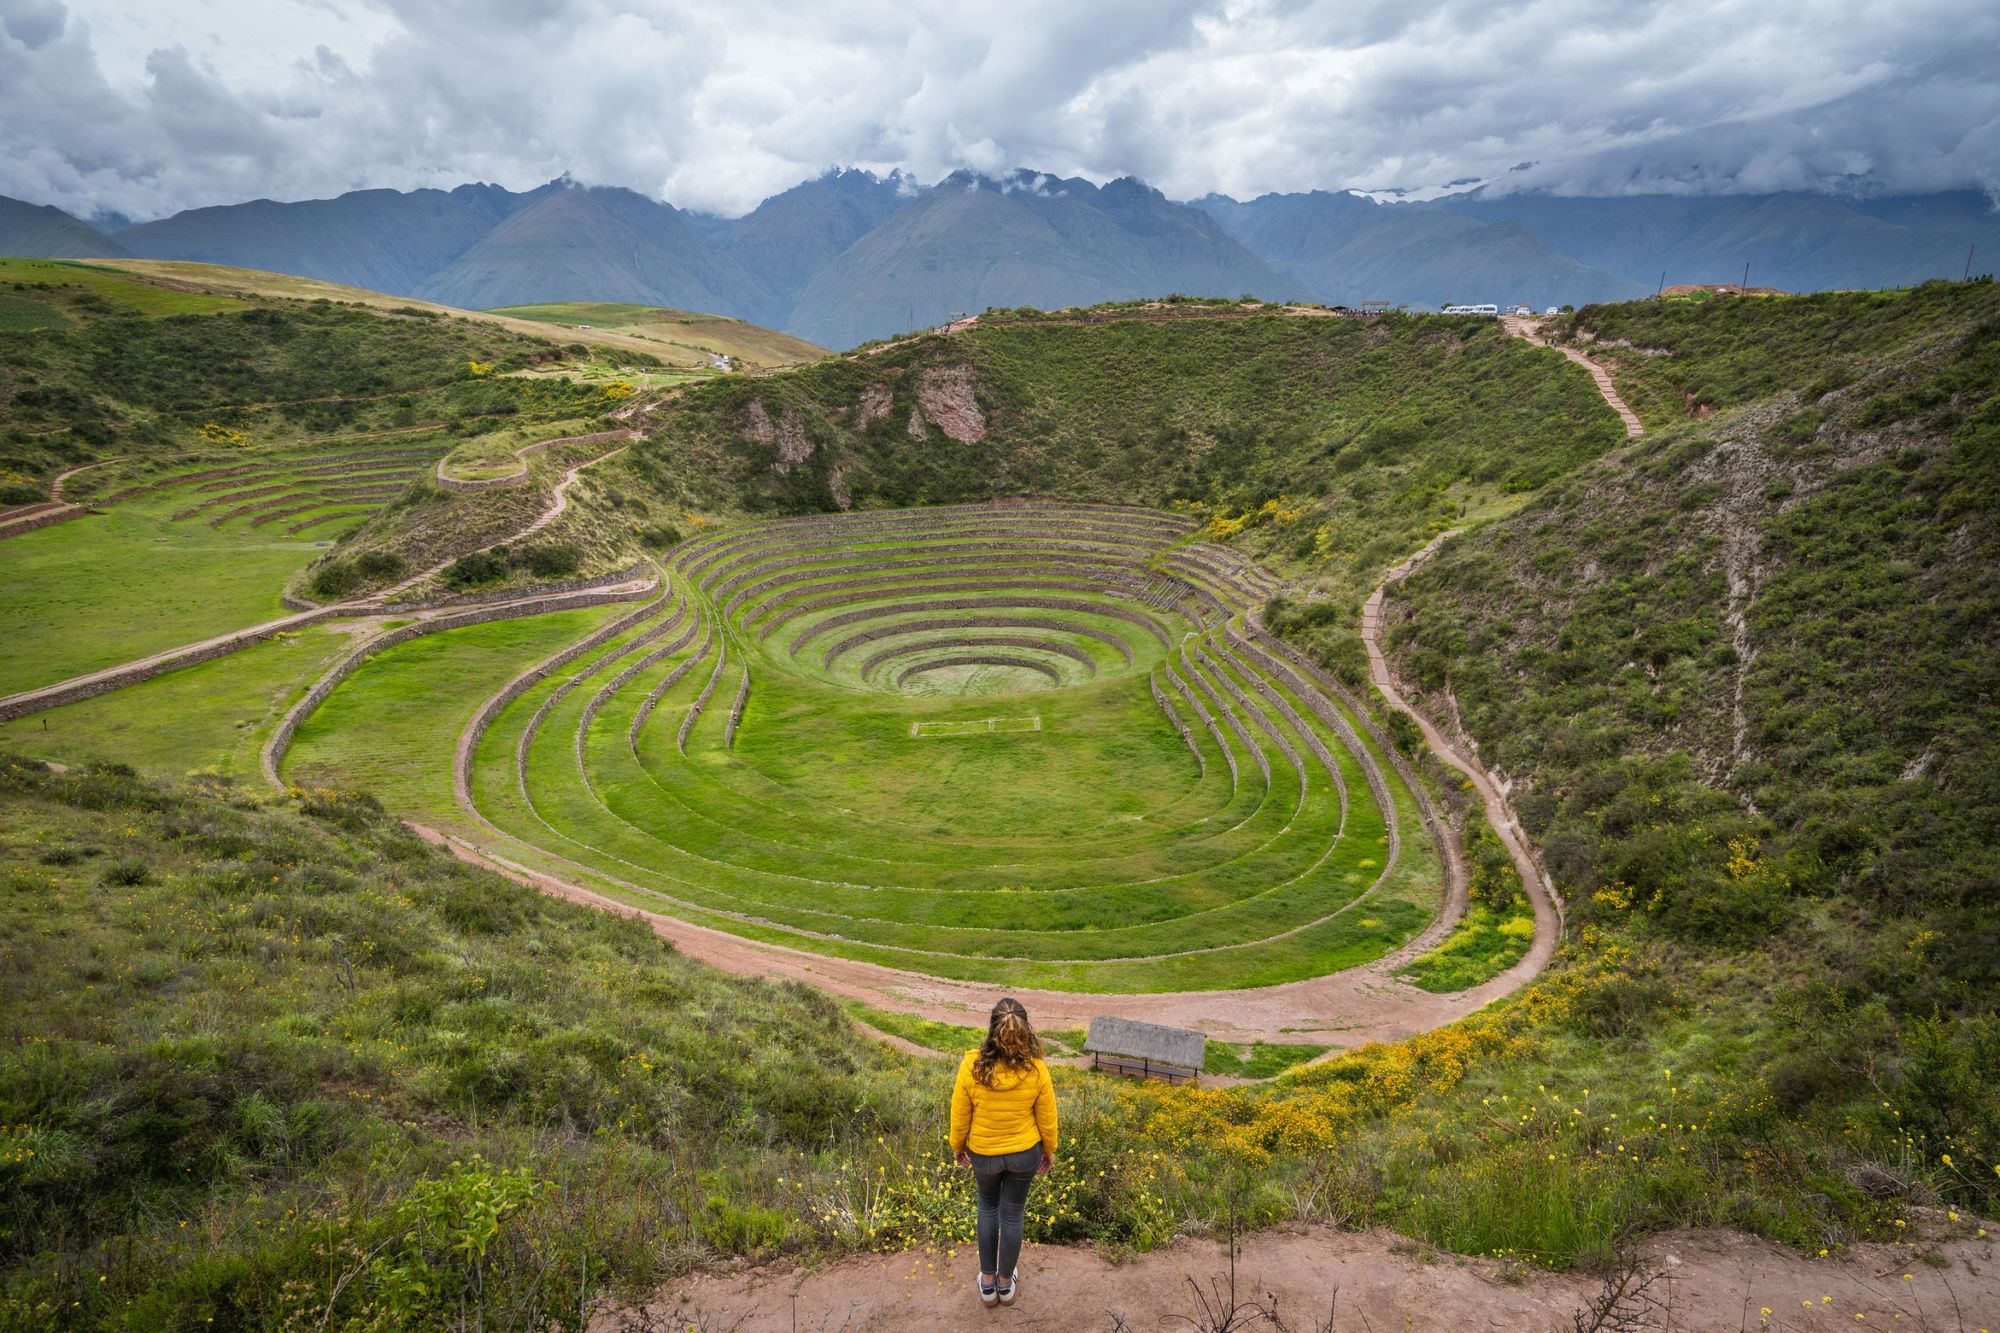 Exploring the circular Inca terraces of Moray, an archaeological site in the Sacred Valley of the Incas. Photo: Getty